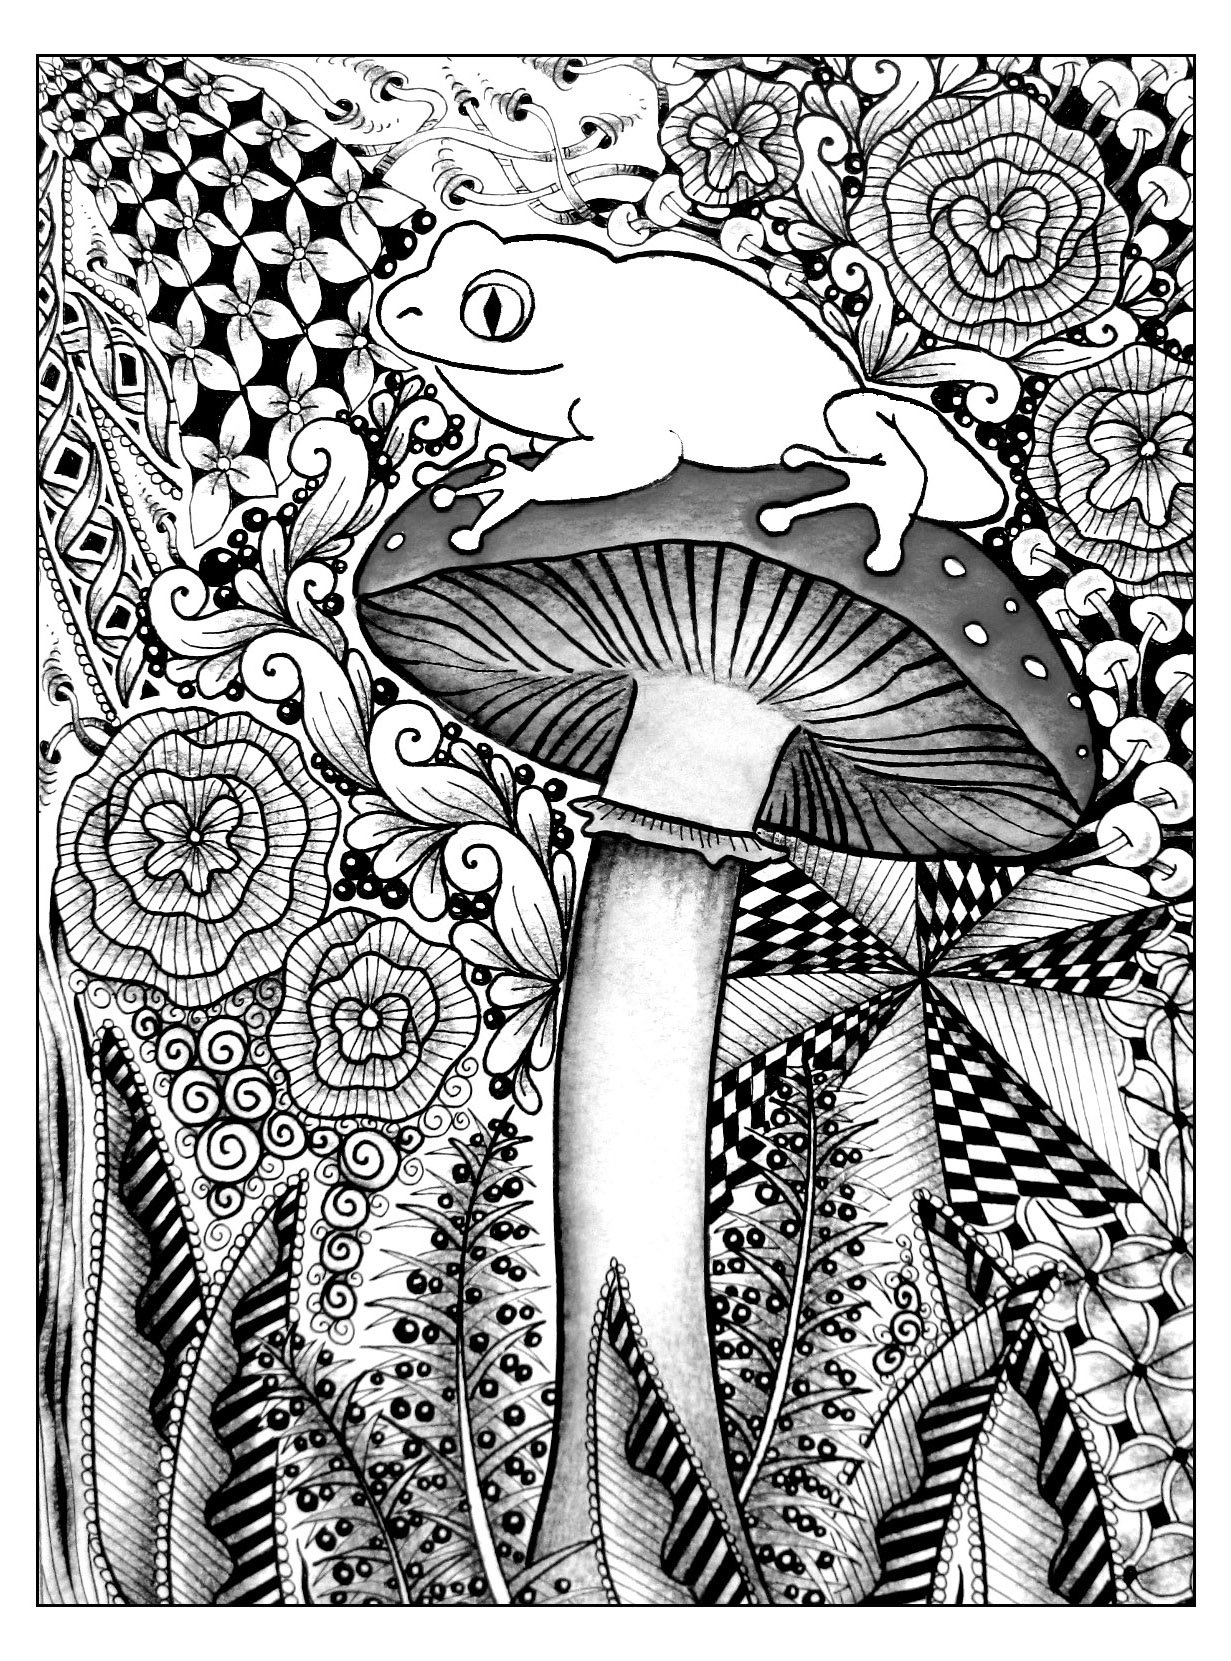 Download Mushroom - Coloring Pages for Adults